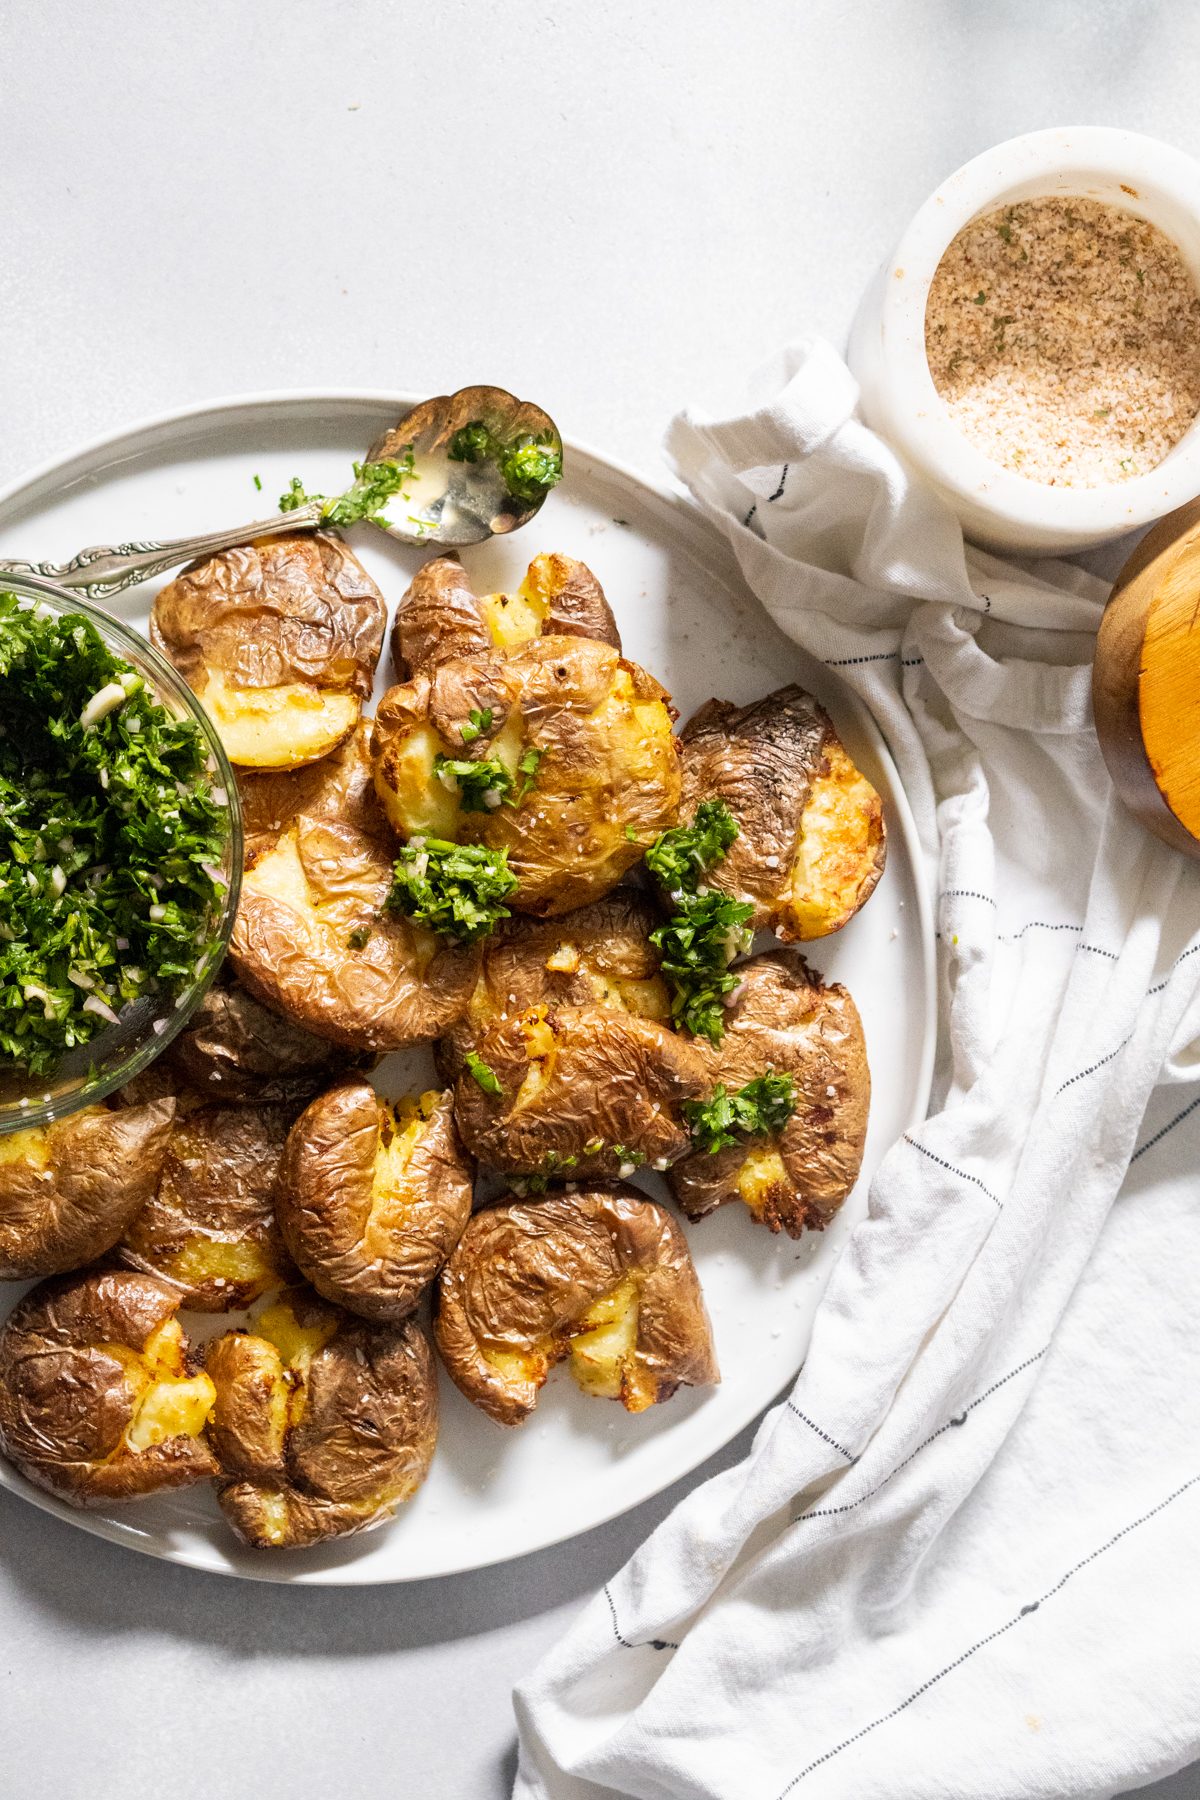 Smashed potatoes drizzled with chimichurri sauce.